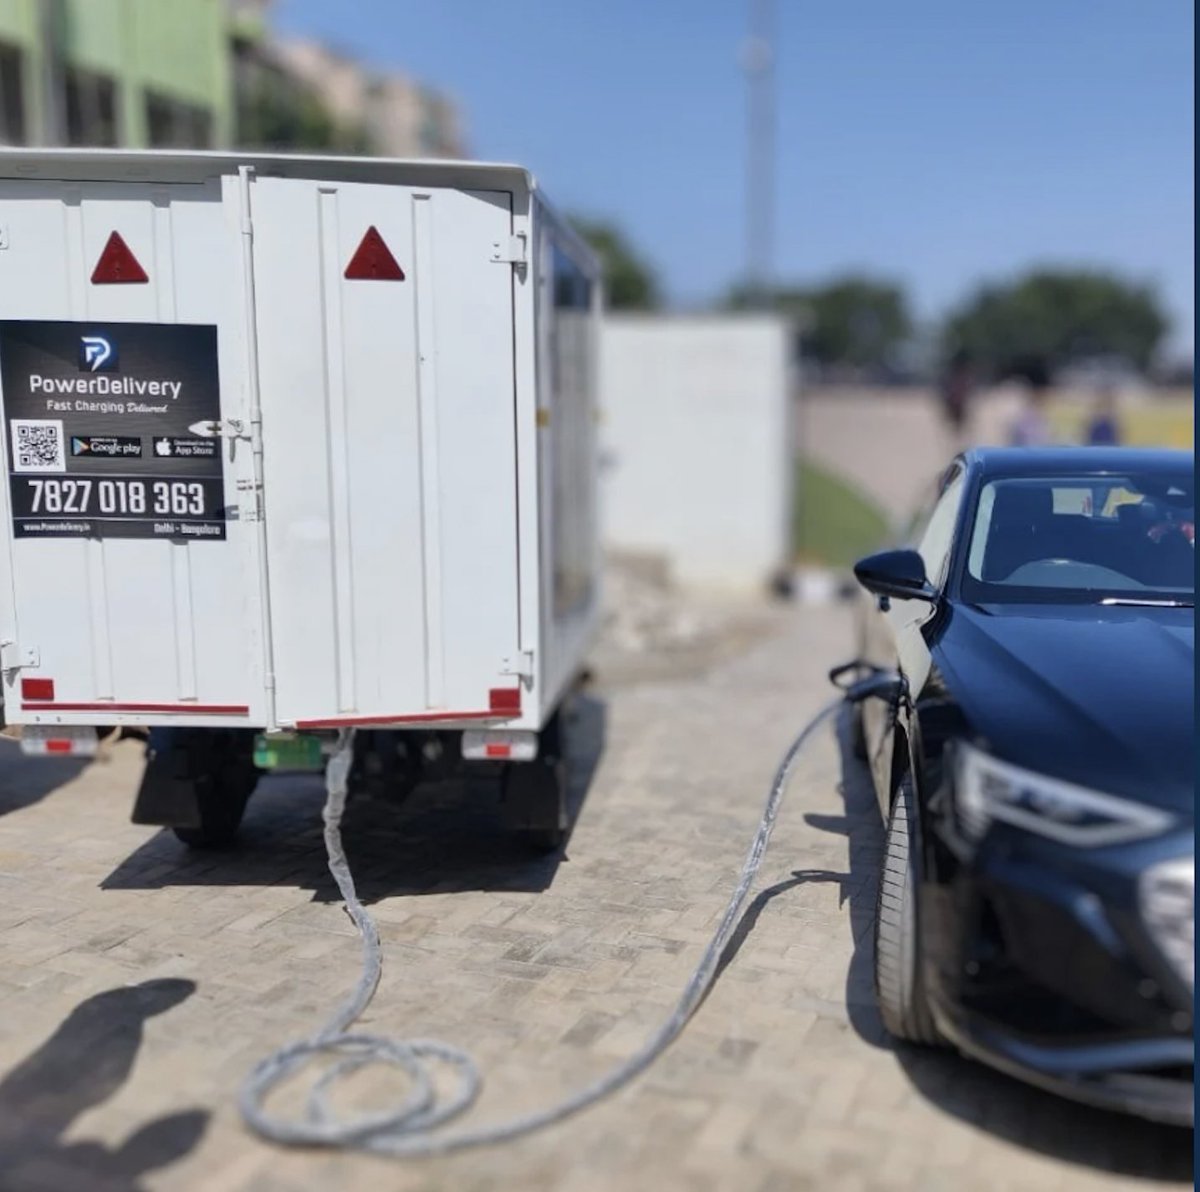 The current infrastructure just can't keep up. But there is a better way!
At PowerDelivery, we offer off-grid charging with:

Zero failed sessions ✅
No confusing apps - just plug & charge! 🔋

Hassle-free & seamless experience ⚡️
#fastcharging #PowerDelivery #EVChargers